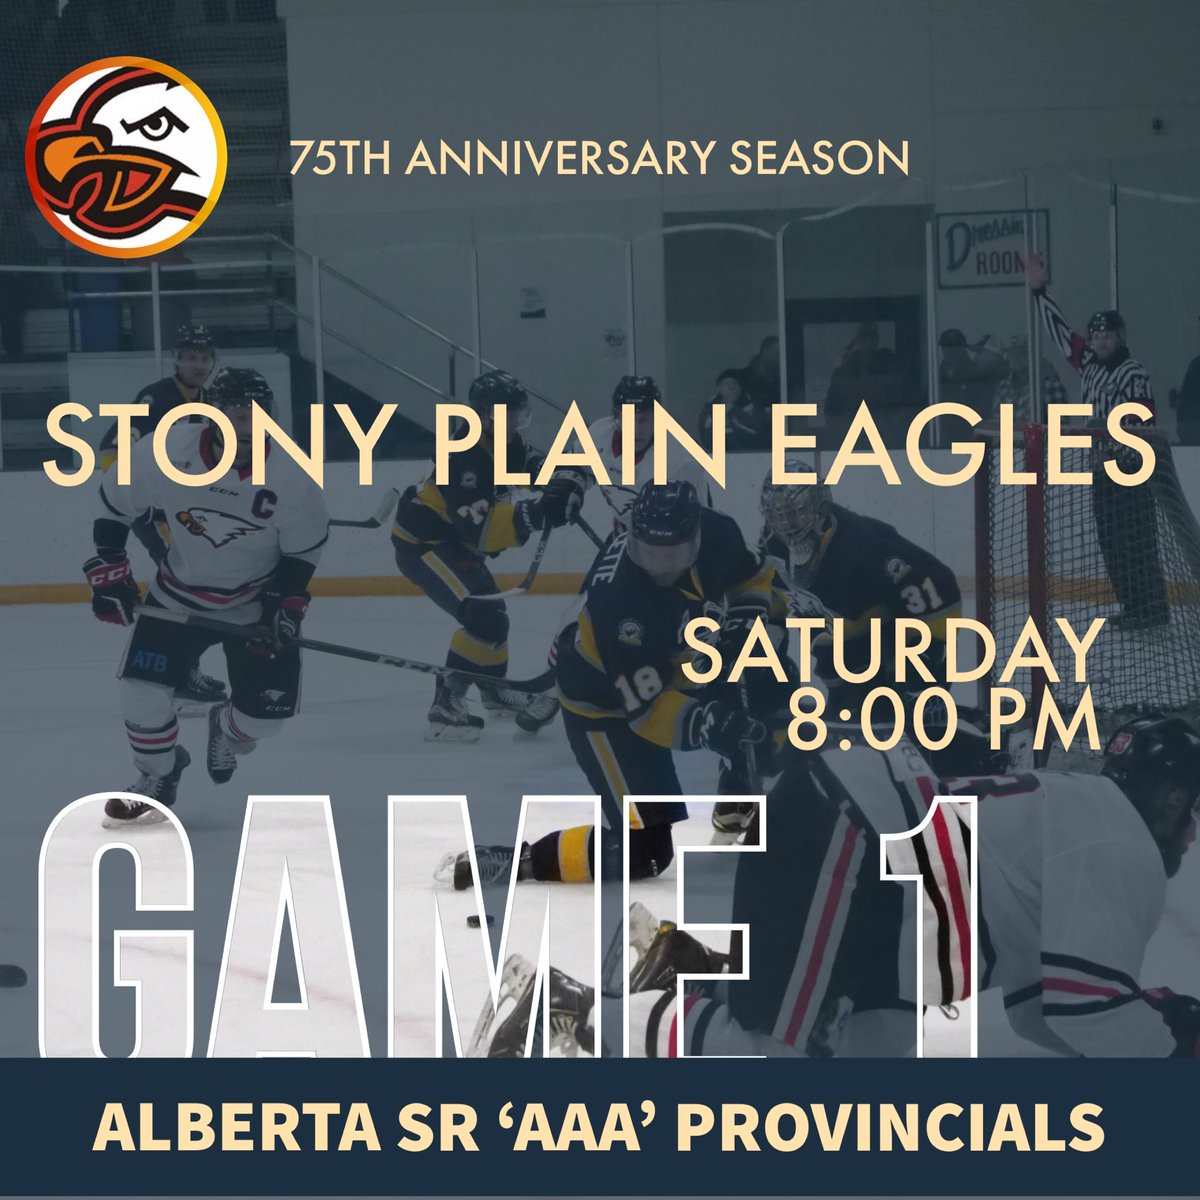 Saturday - GAME 1
You get Eagles, more Eagles, beer gardens, concession, 50/50, silent auction, and the best AAA players for one low price!!

Can’t wait to see you again Saturday!!

#allancup #aaa #hockey #Alberta #Canada